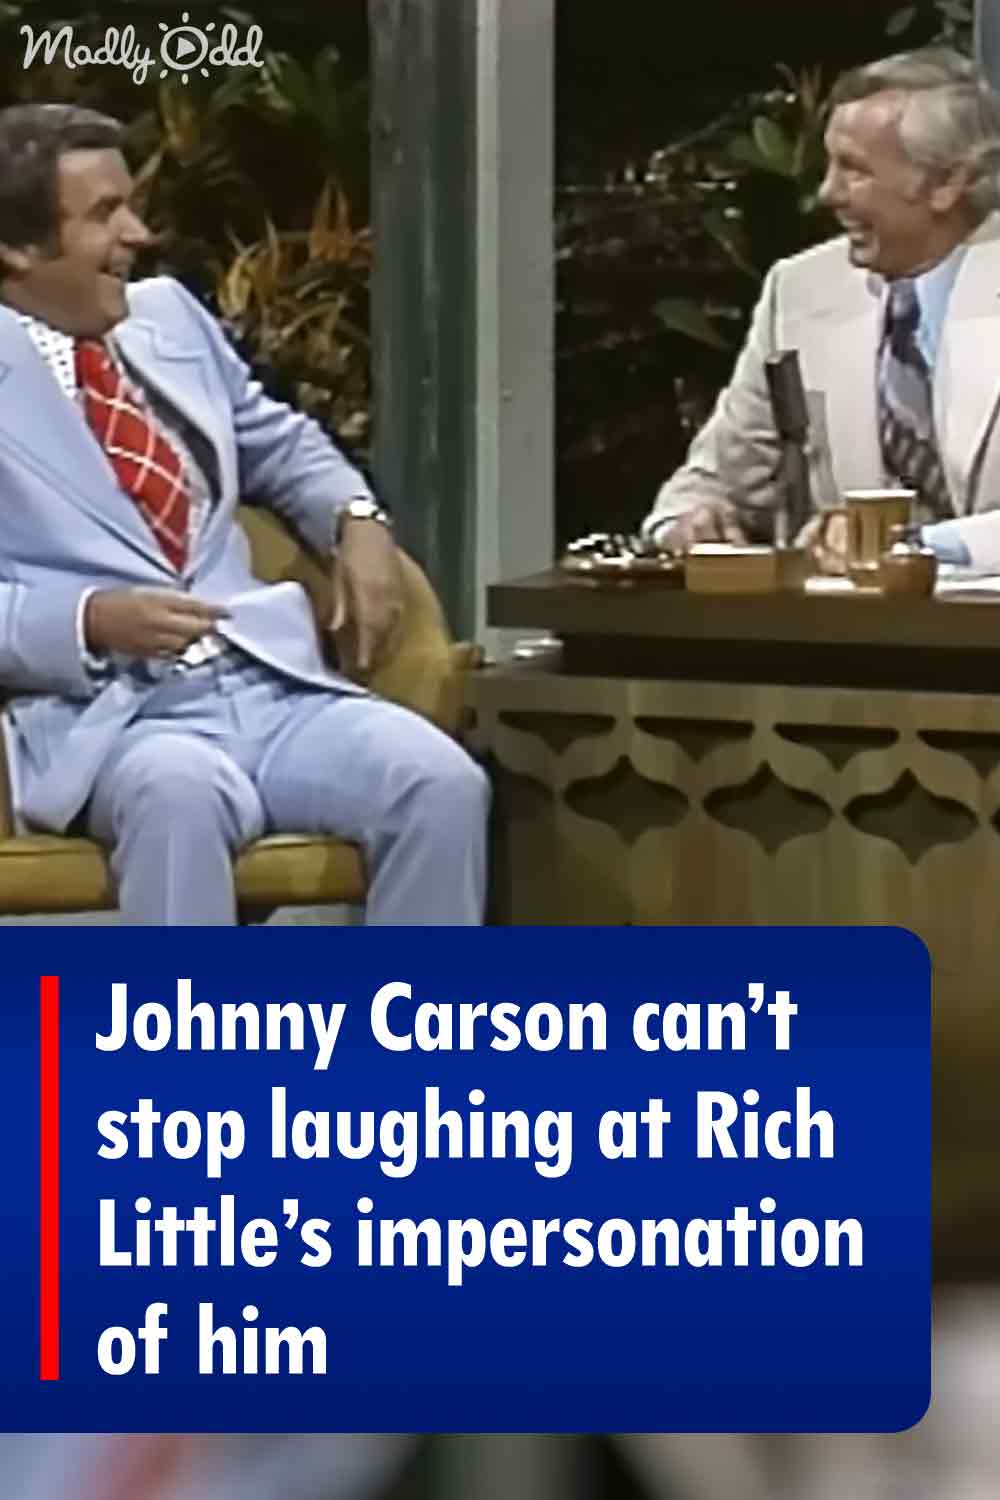 Johnny Carson can’t stop laughing at Rich Little’s impersonation of him